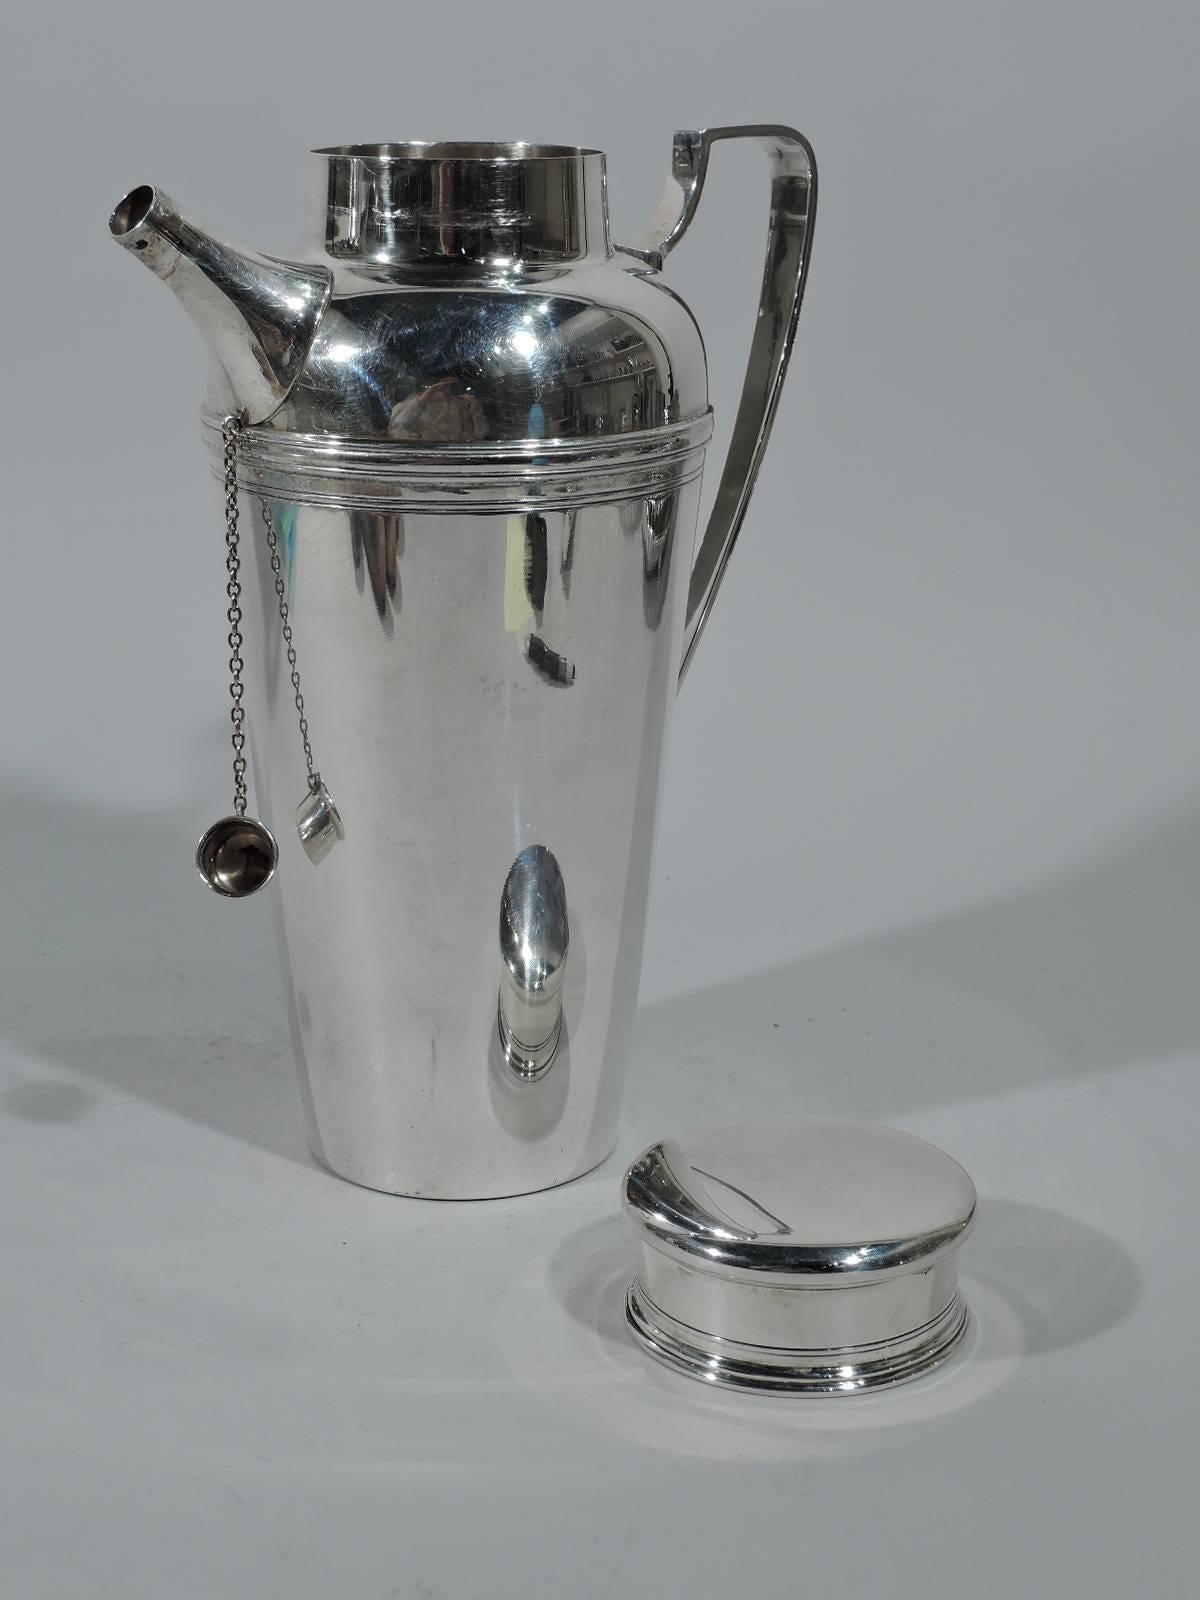 Modern sterling silver cocktail shaker. Made by Tiffany & Co. in New York. Tapering sides, short neck, flat and overhanging cover, scroll bracket handle, and diagonal spout with built-in strainer and chained cap. Spare with incised bands. Hallmark